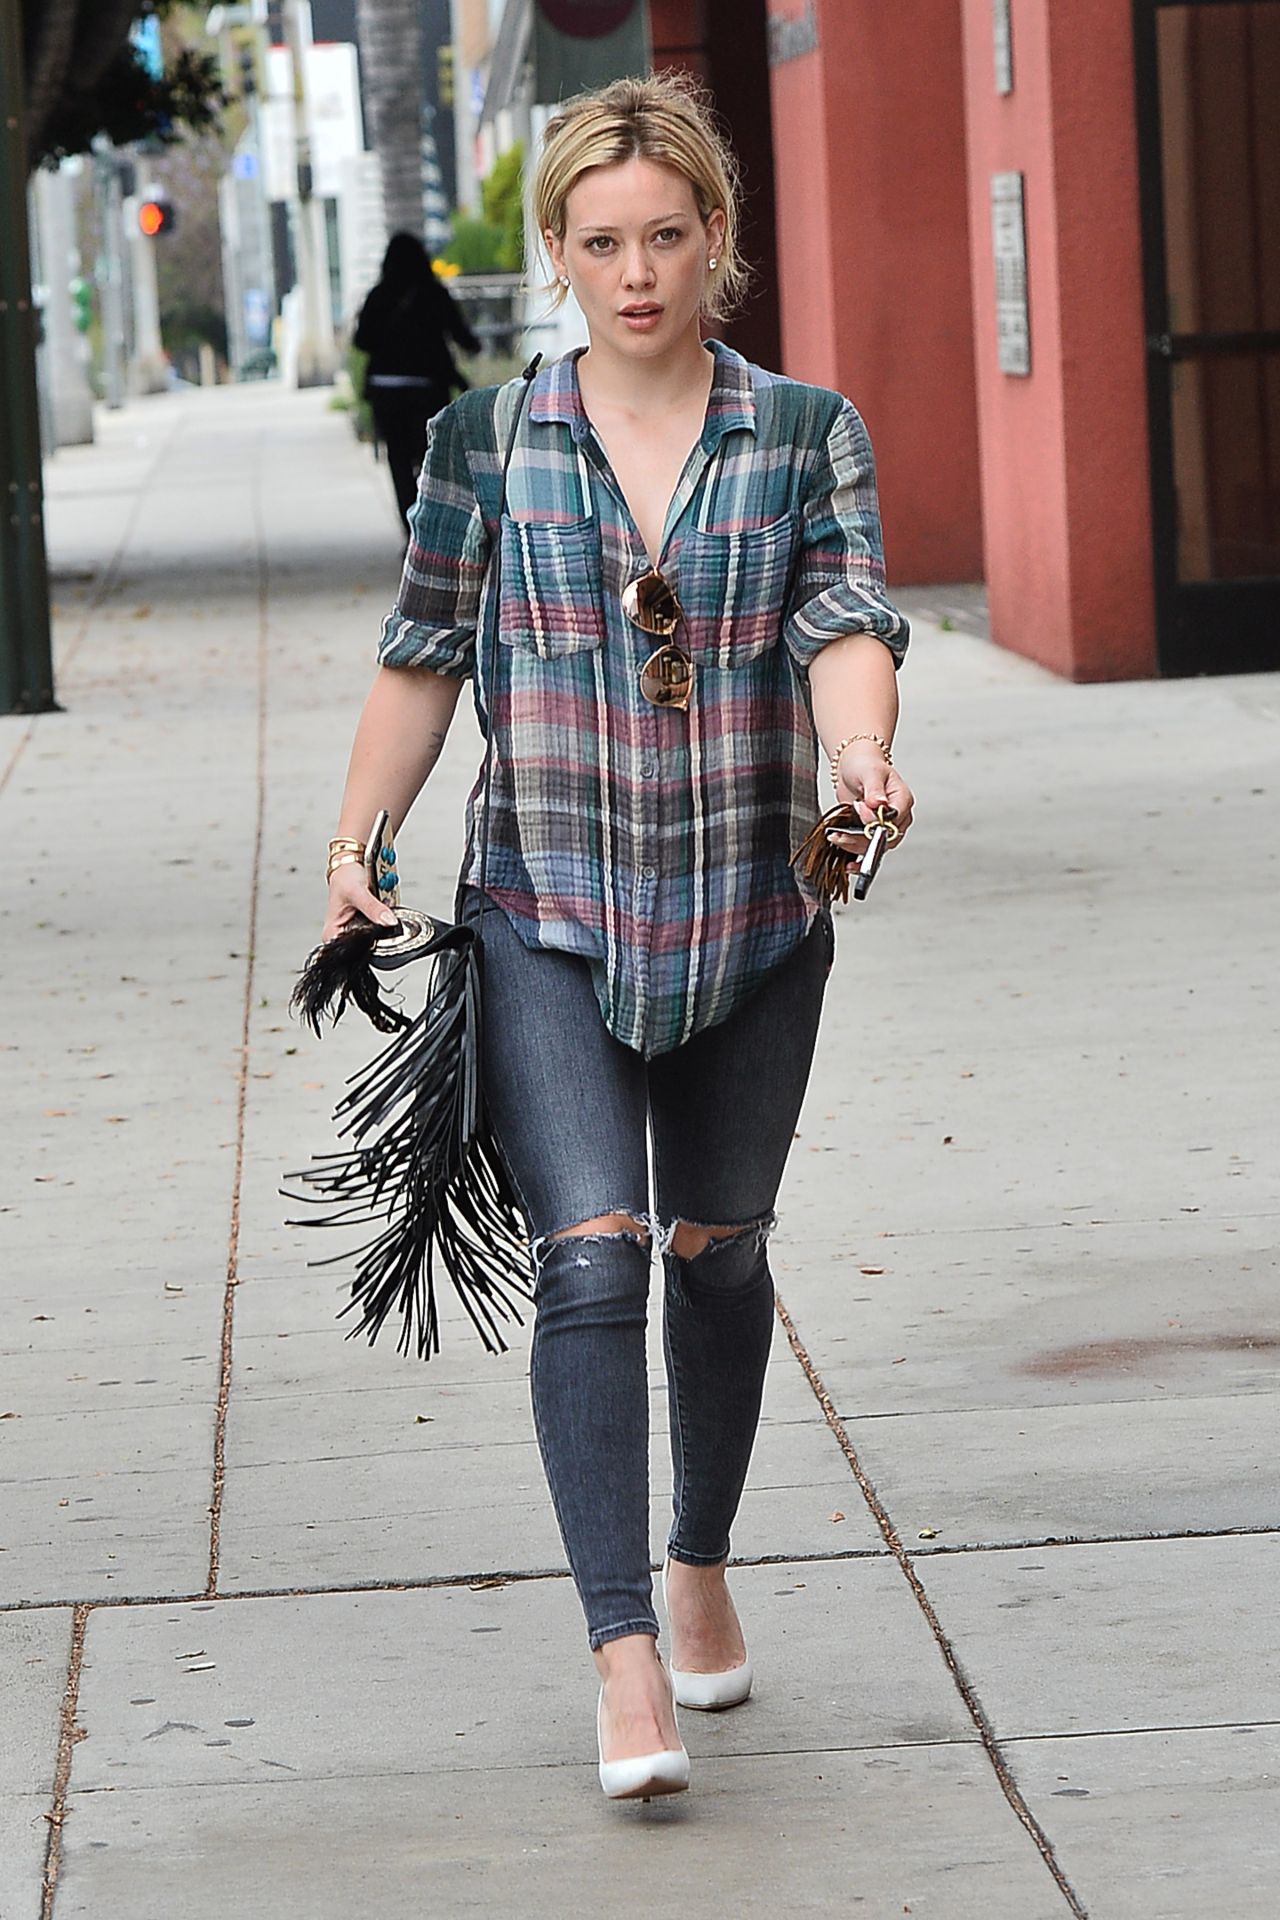 Hilary Duff - Out in Los Angeles - June 2015 • CelebMafia